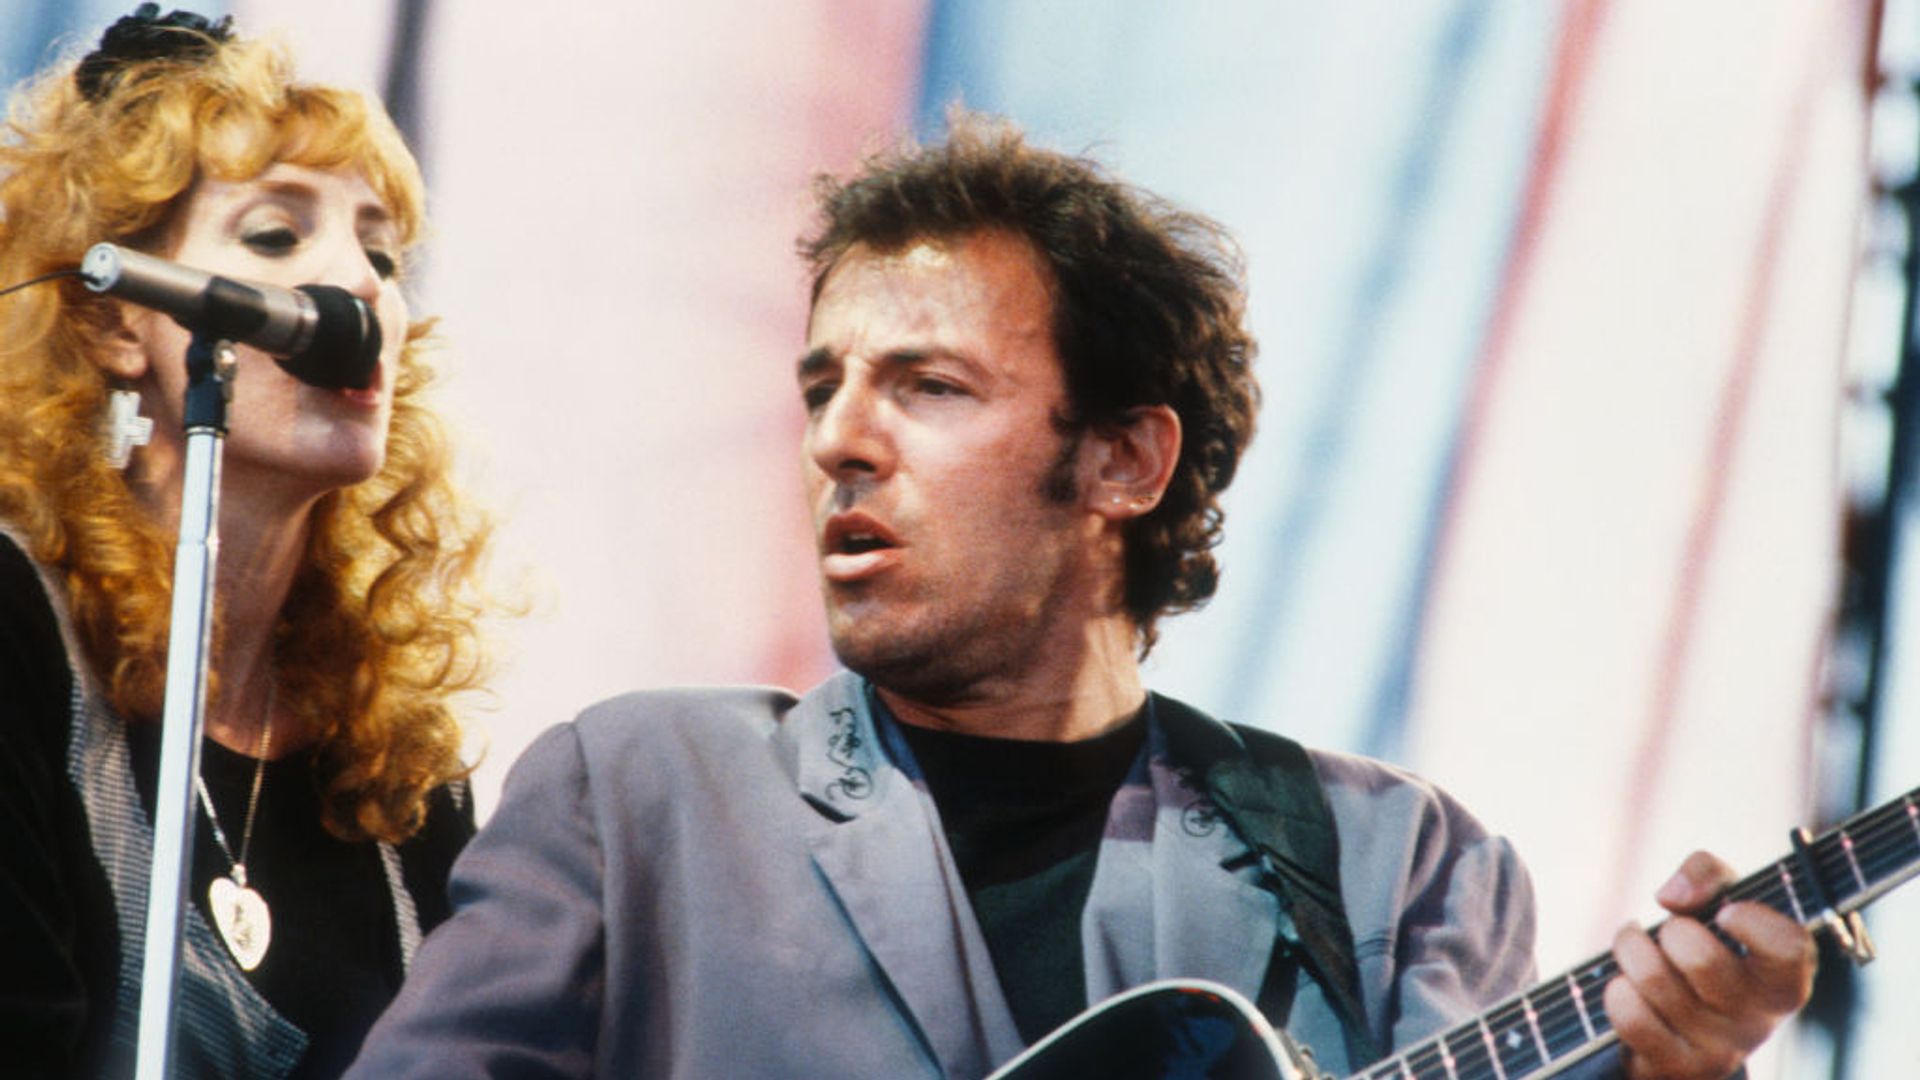 Bruce Springsteen and Patti Scialfa perform on stage